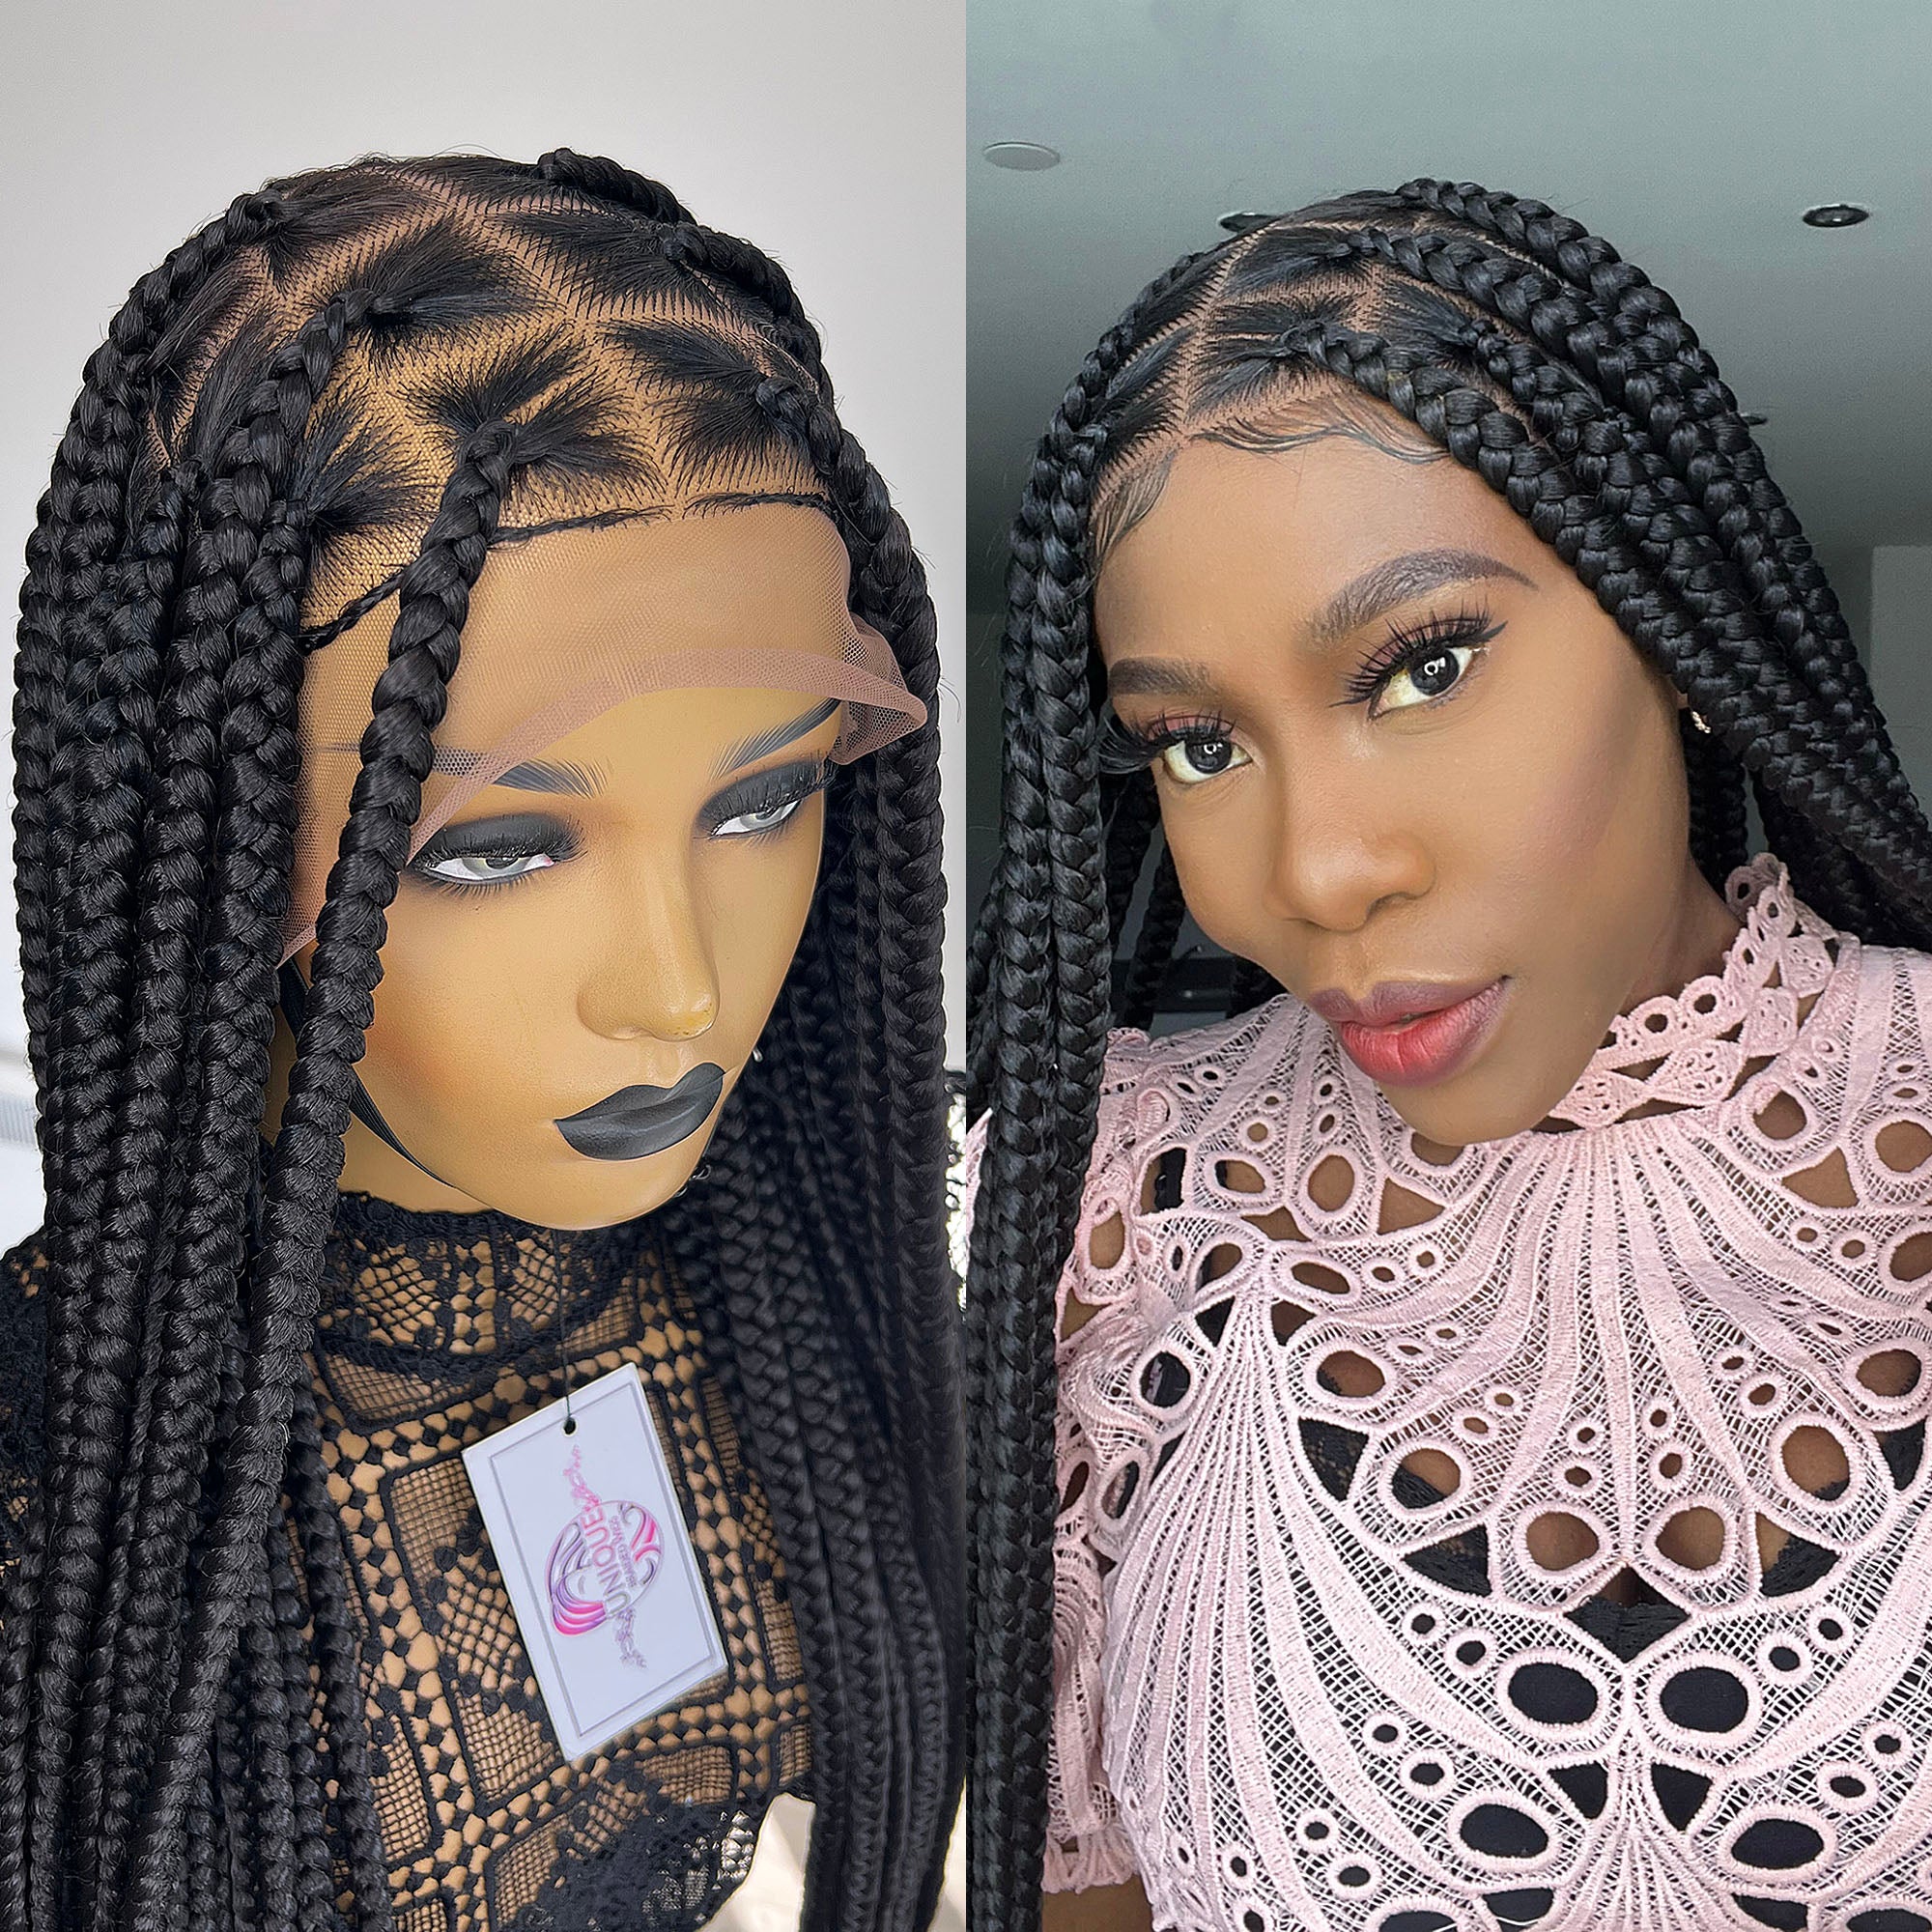 Knotless Full Lace Braided Wig - Missy